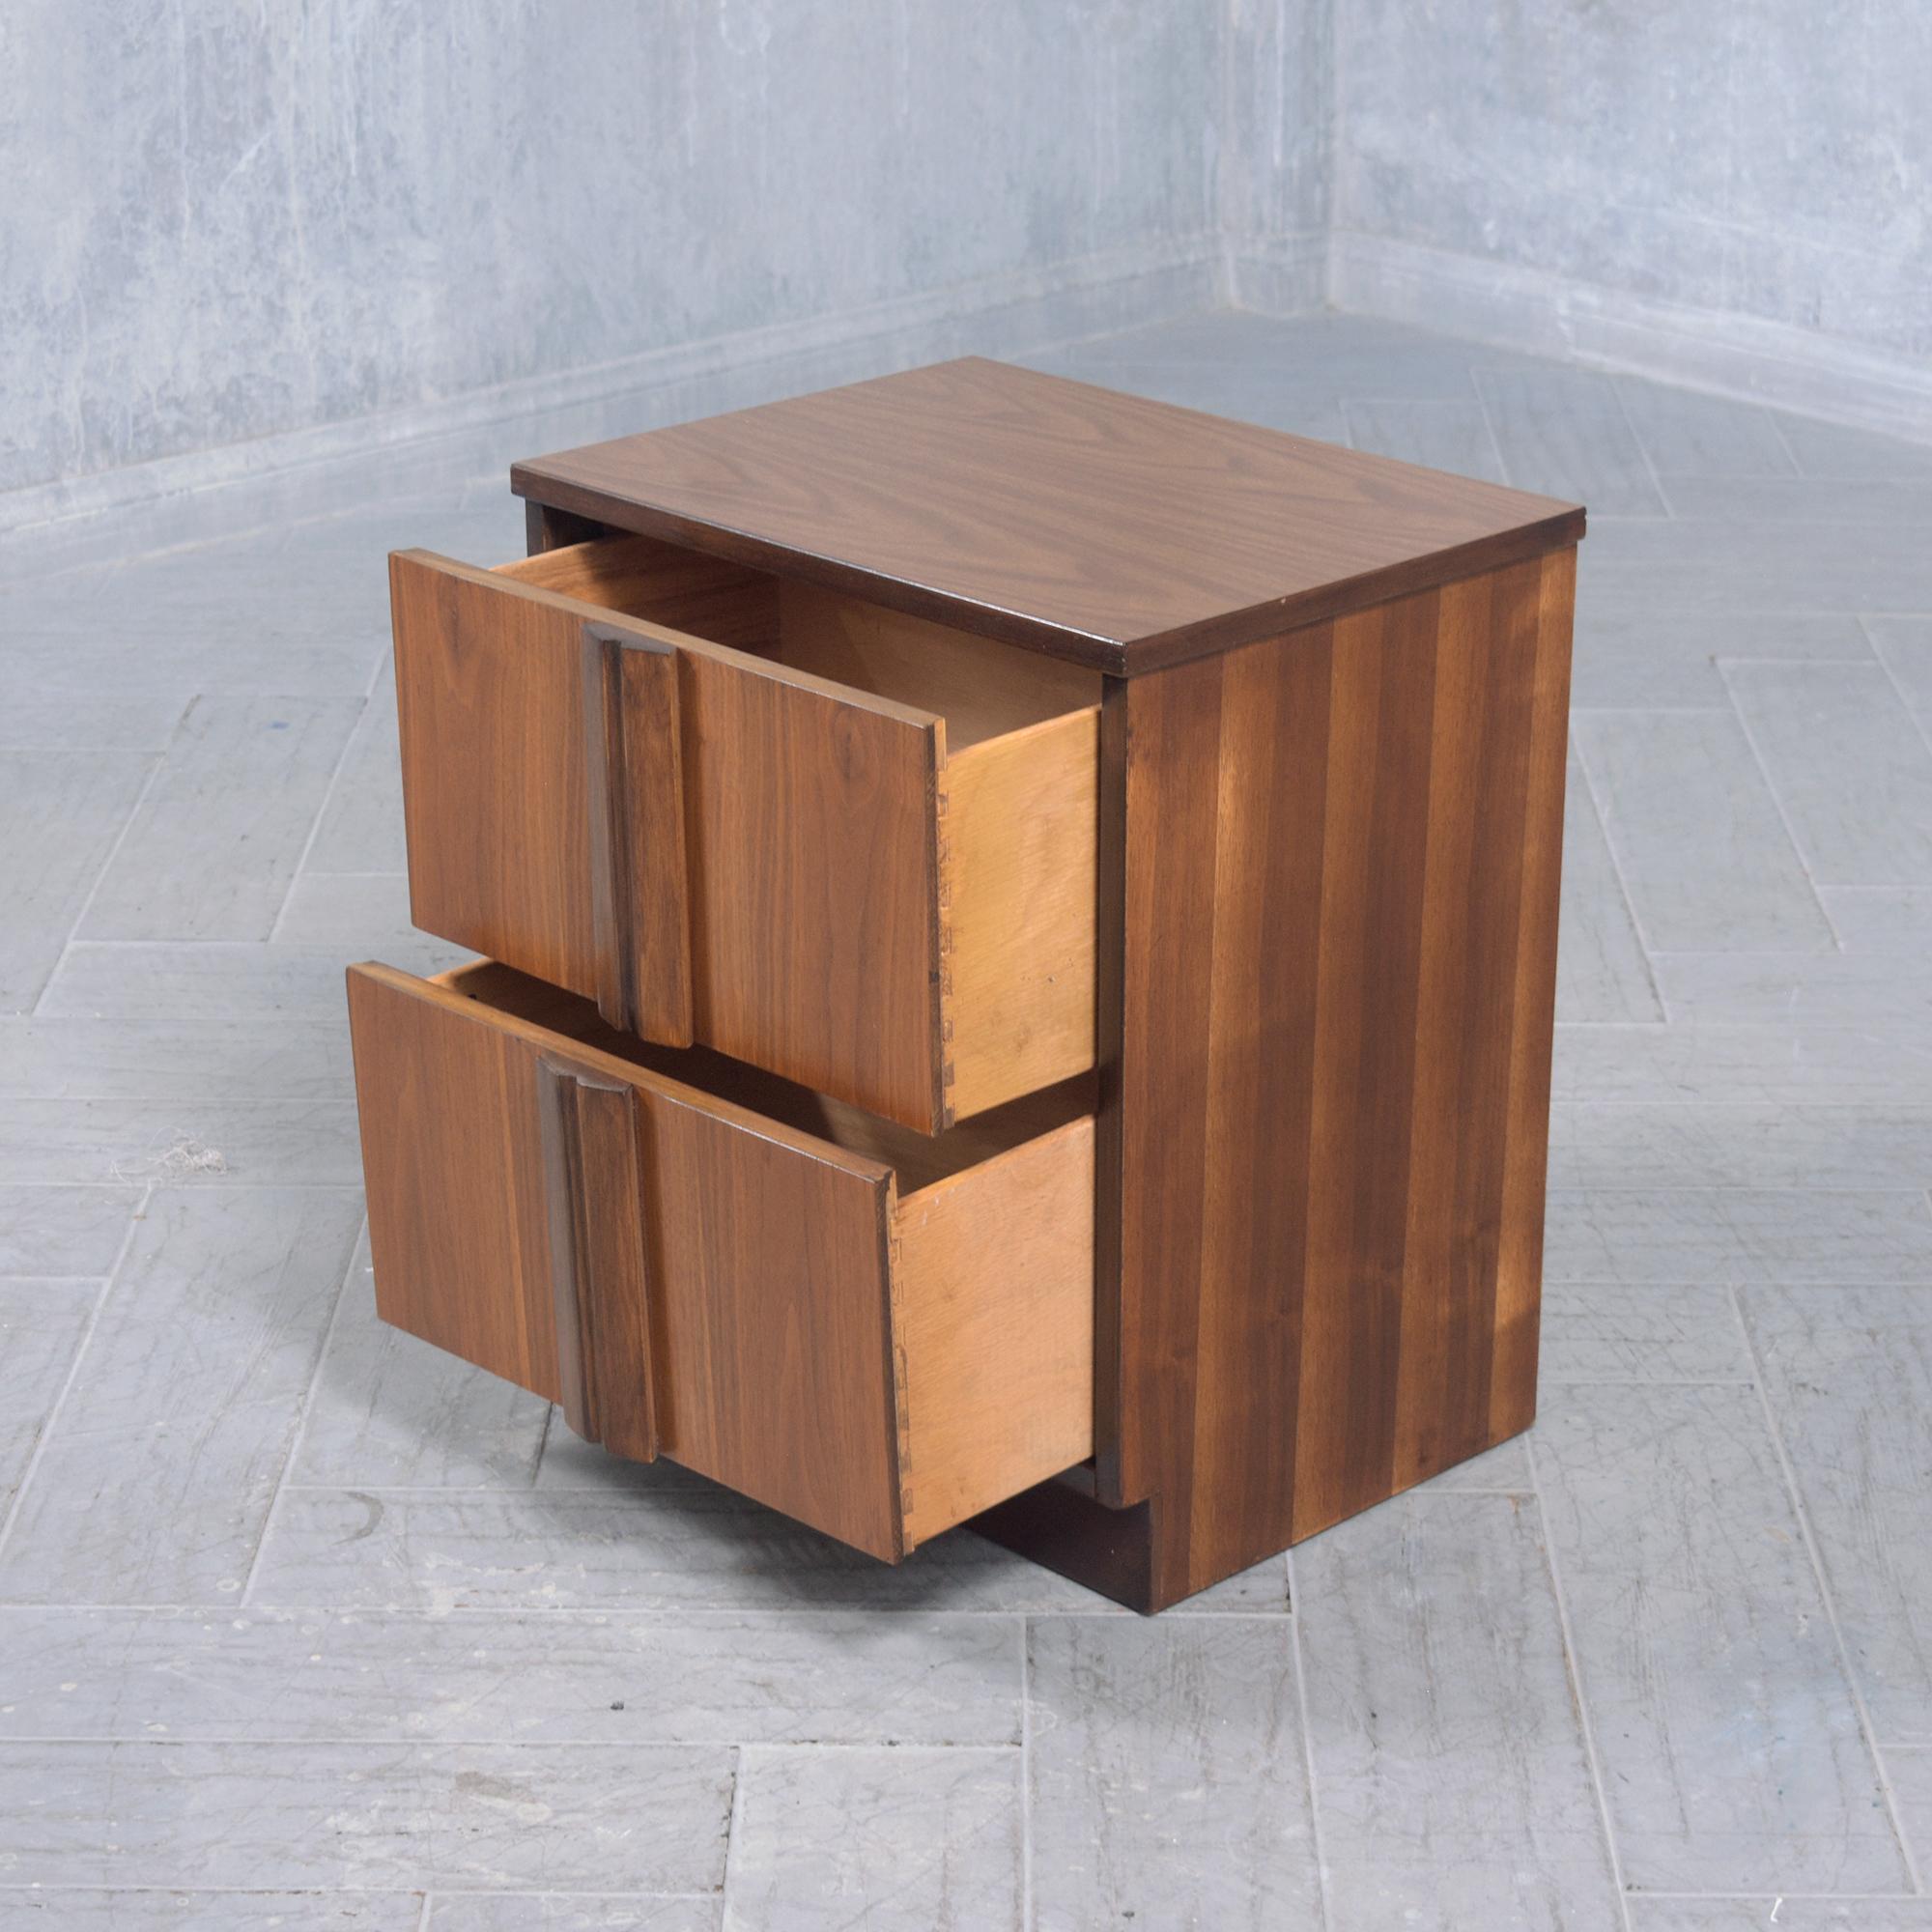 Dive into the mid-century era with this exceptional 1960s nightstand, masterfully crafted from walnut wood. Professionally restored by our in-house team of experts, this single bedside table is in great condition. It boasts a harmonious blend of